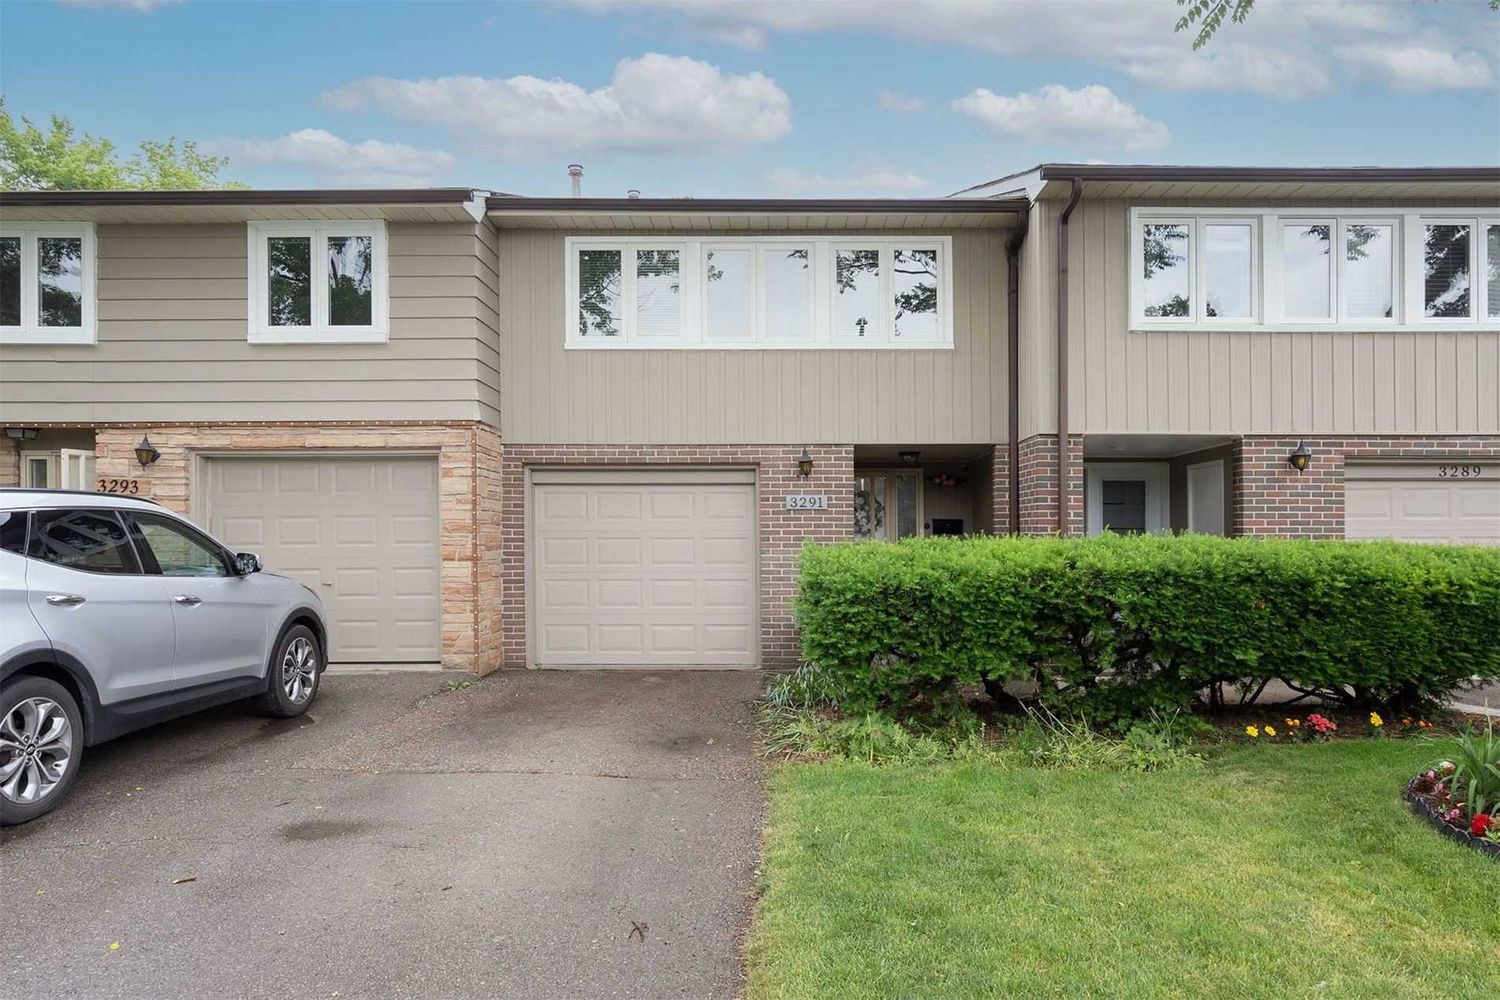 3255-3297 Fieldgate Drive. 1856 Kirkwall Crescent Townhomes is located in  Mississauga, Toronto - image #1 of 2